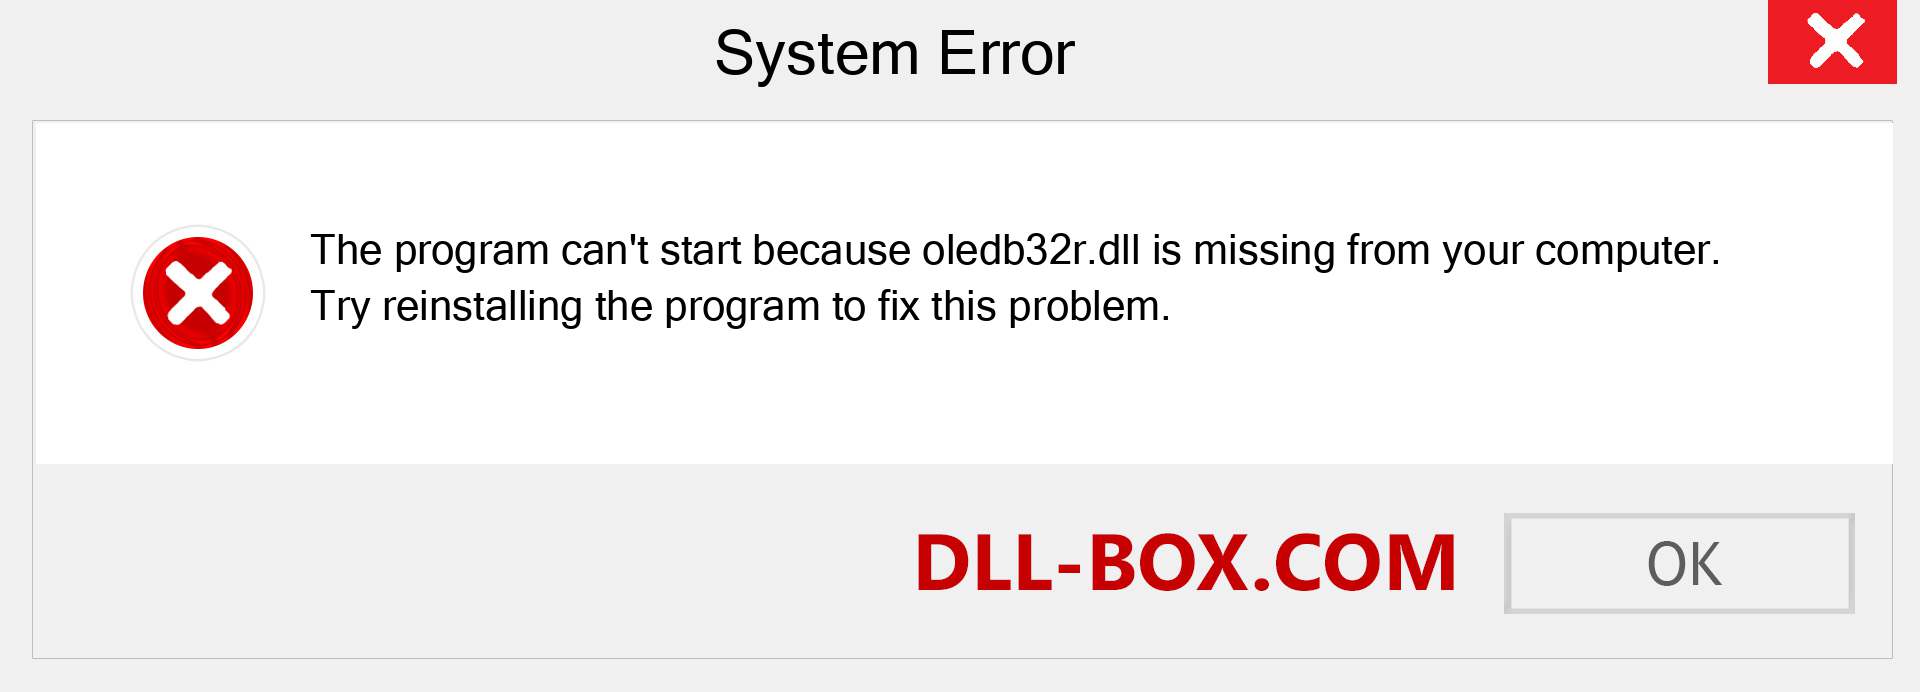  oledb32r.dll file is missing?. Download for Windows 7, 8, 10 - Fix  oledb32r dll Missing Error on Windows, photos, images